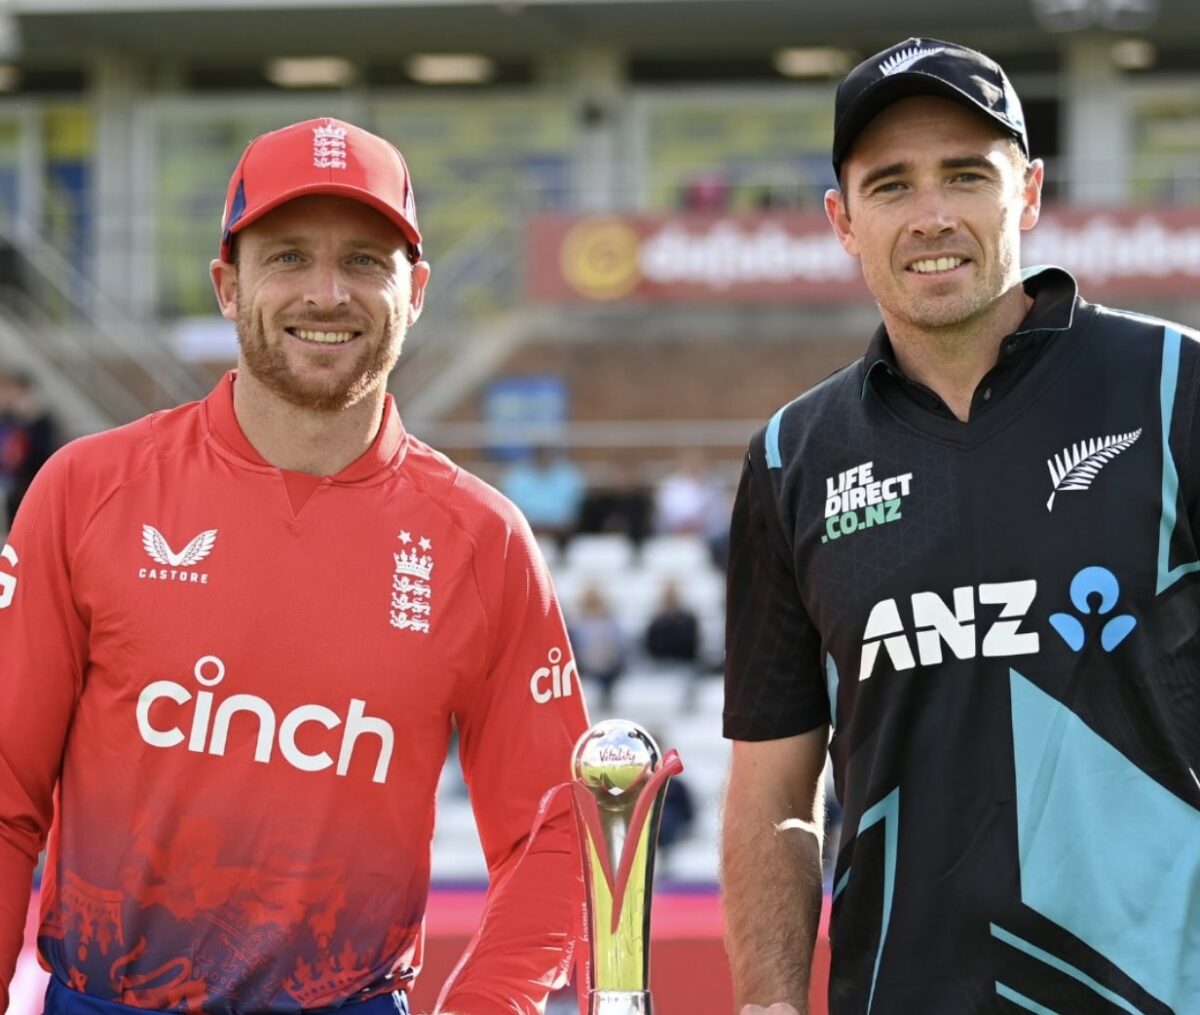 ENG vs NZ Live Streaming In India Channel, App- ICC World Cup 2023, When and Where To Watch England vs New Zealand Live? Match 1